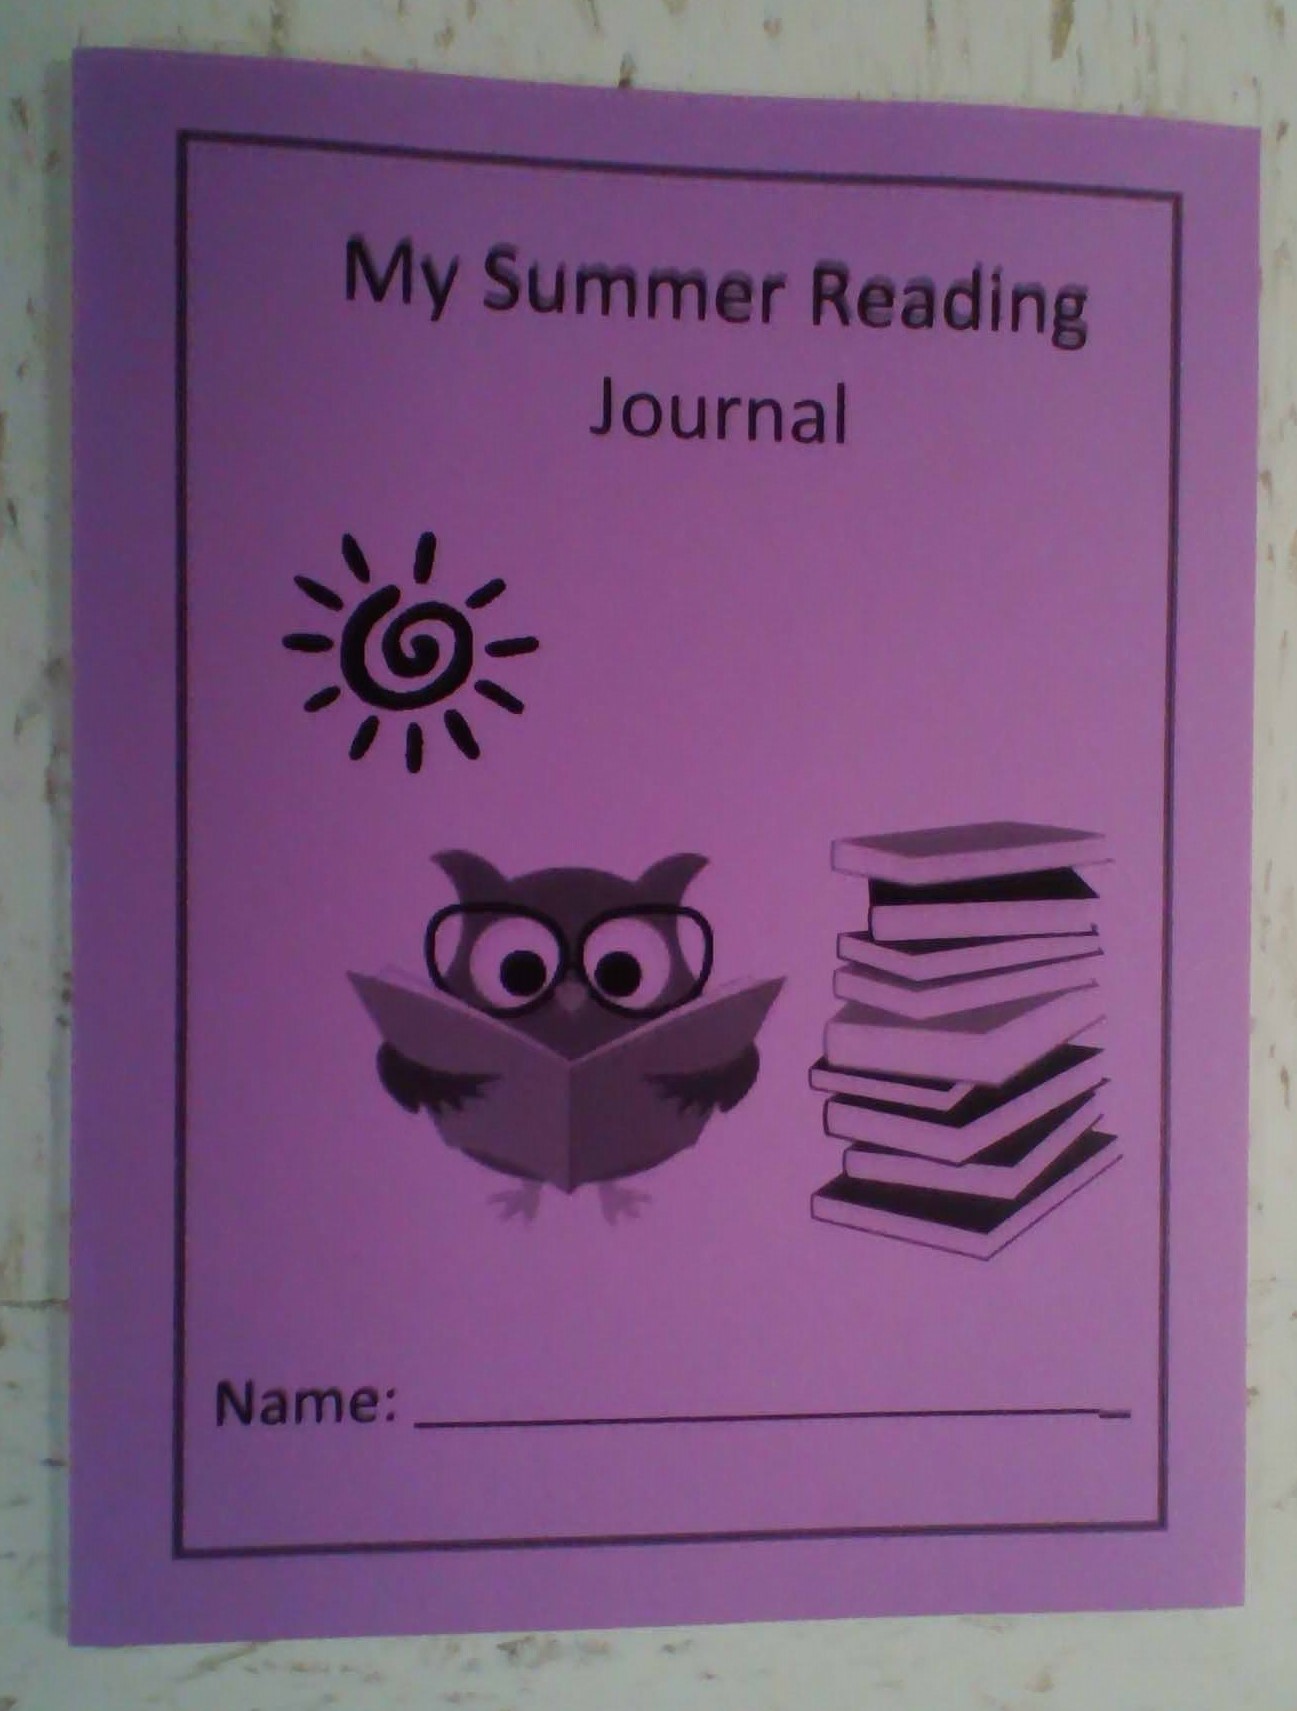 Summer Thrive journal with purple cover